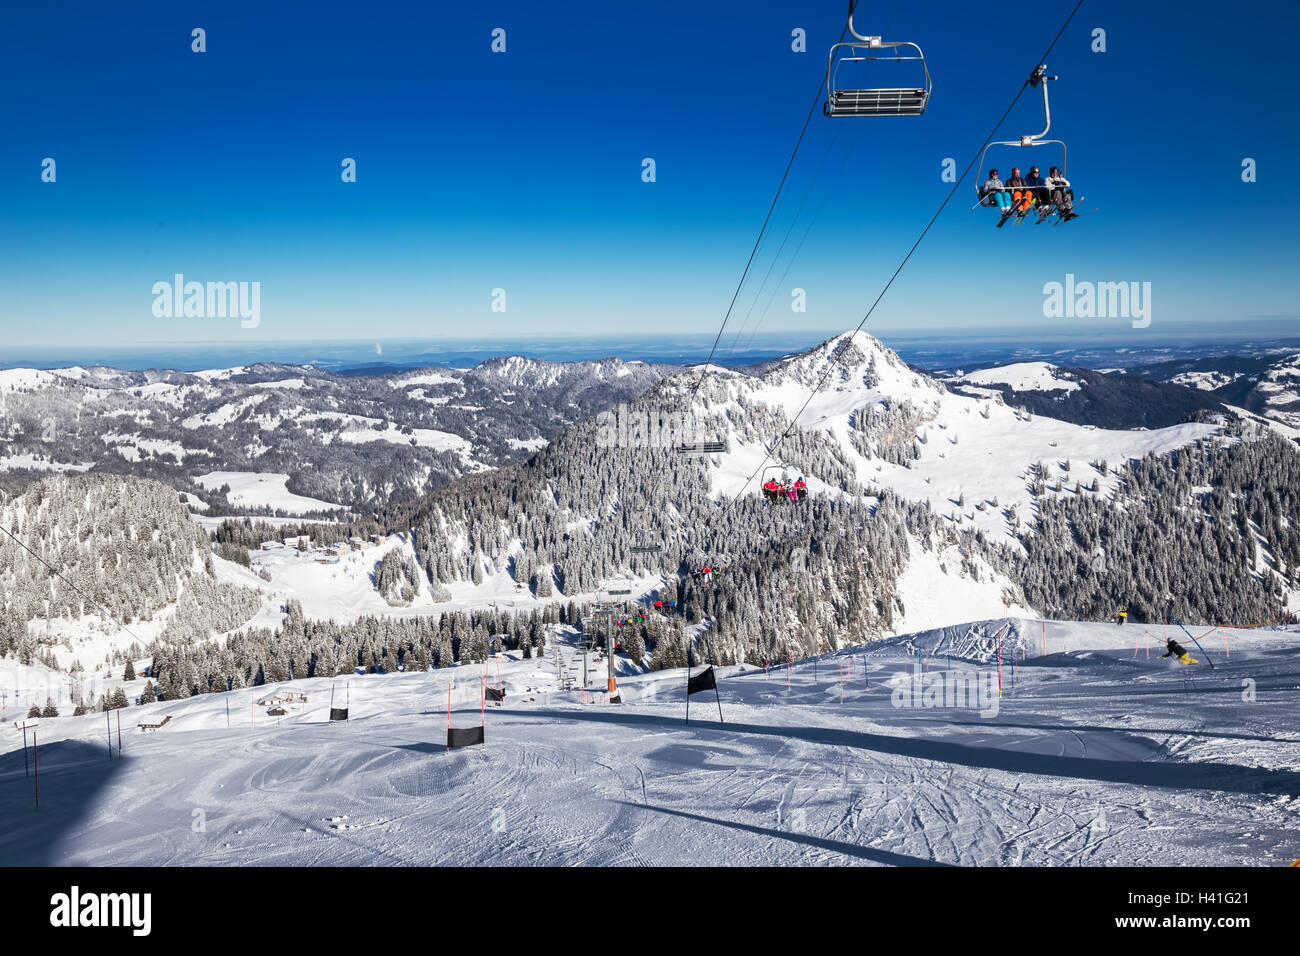 Skiers on the slope and chairlifts seen from the Hoch-Ybrig ski resort, Swiss Alps, Schwyz, Central Switzerland Stock Photo